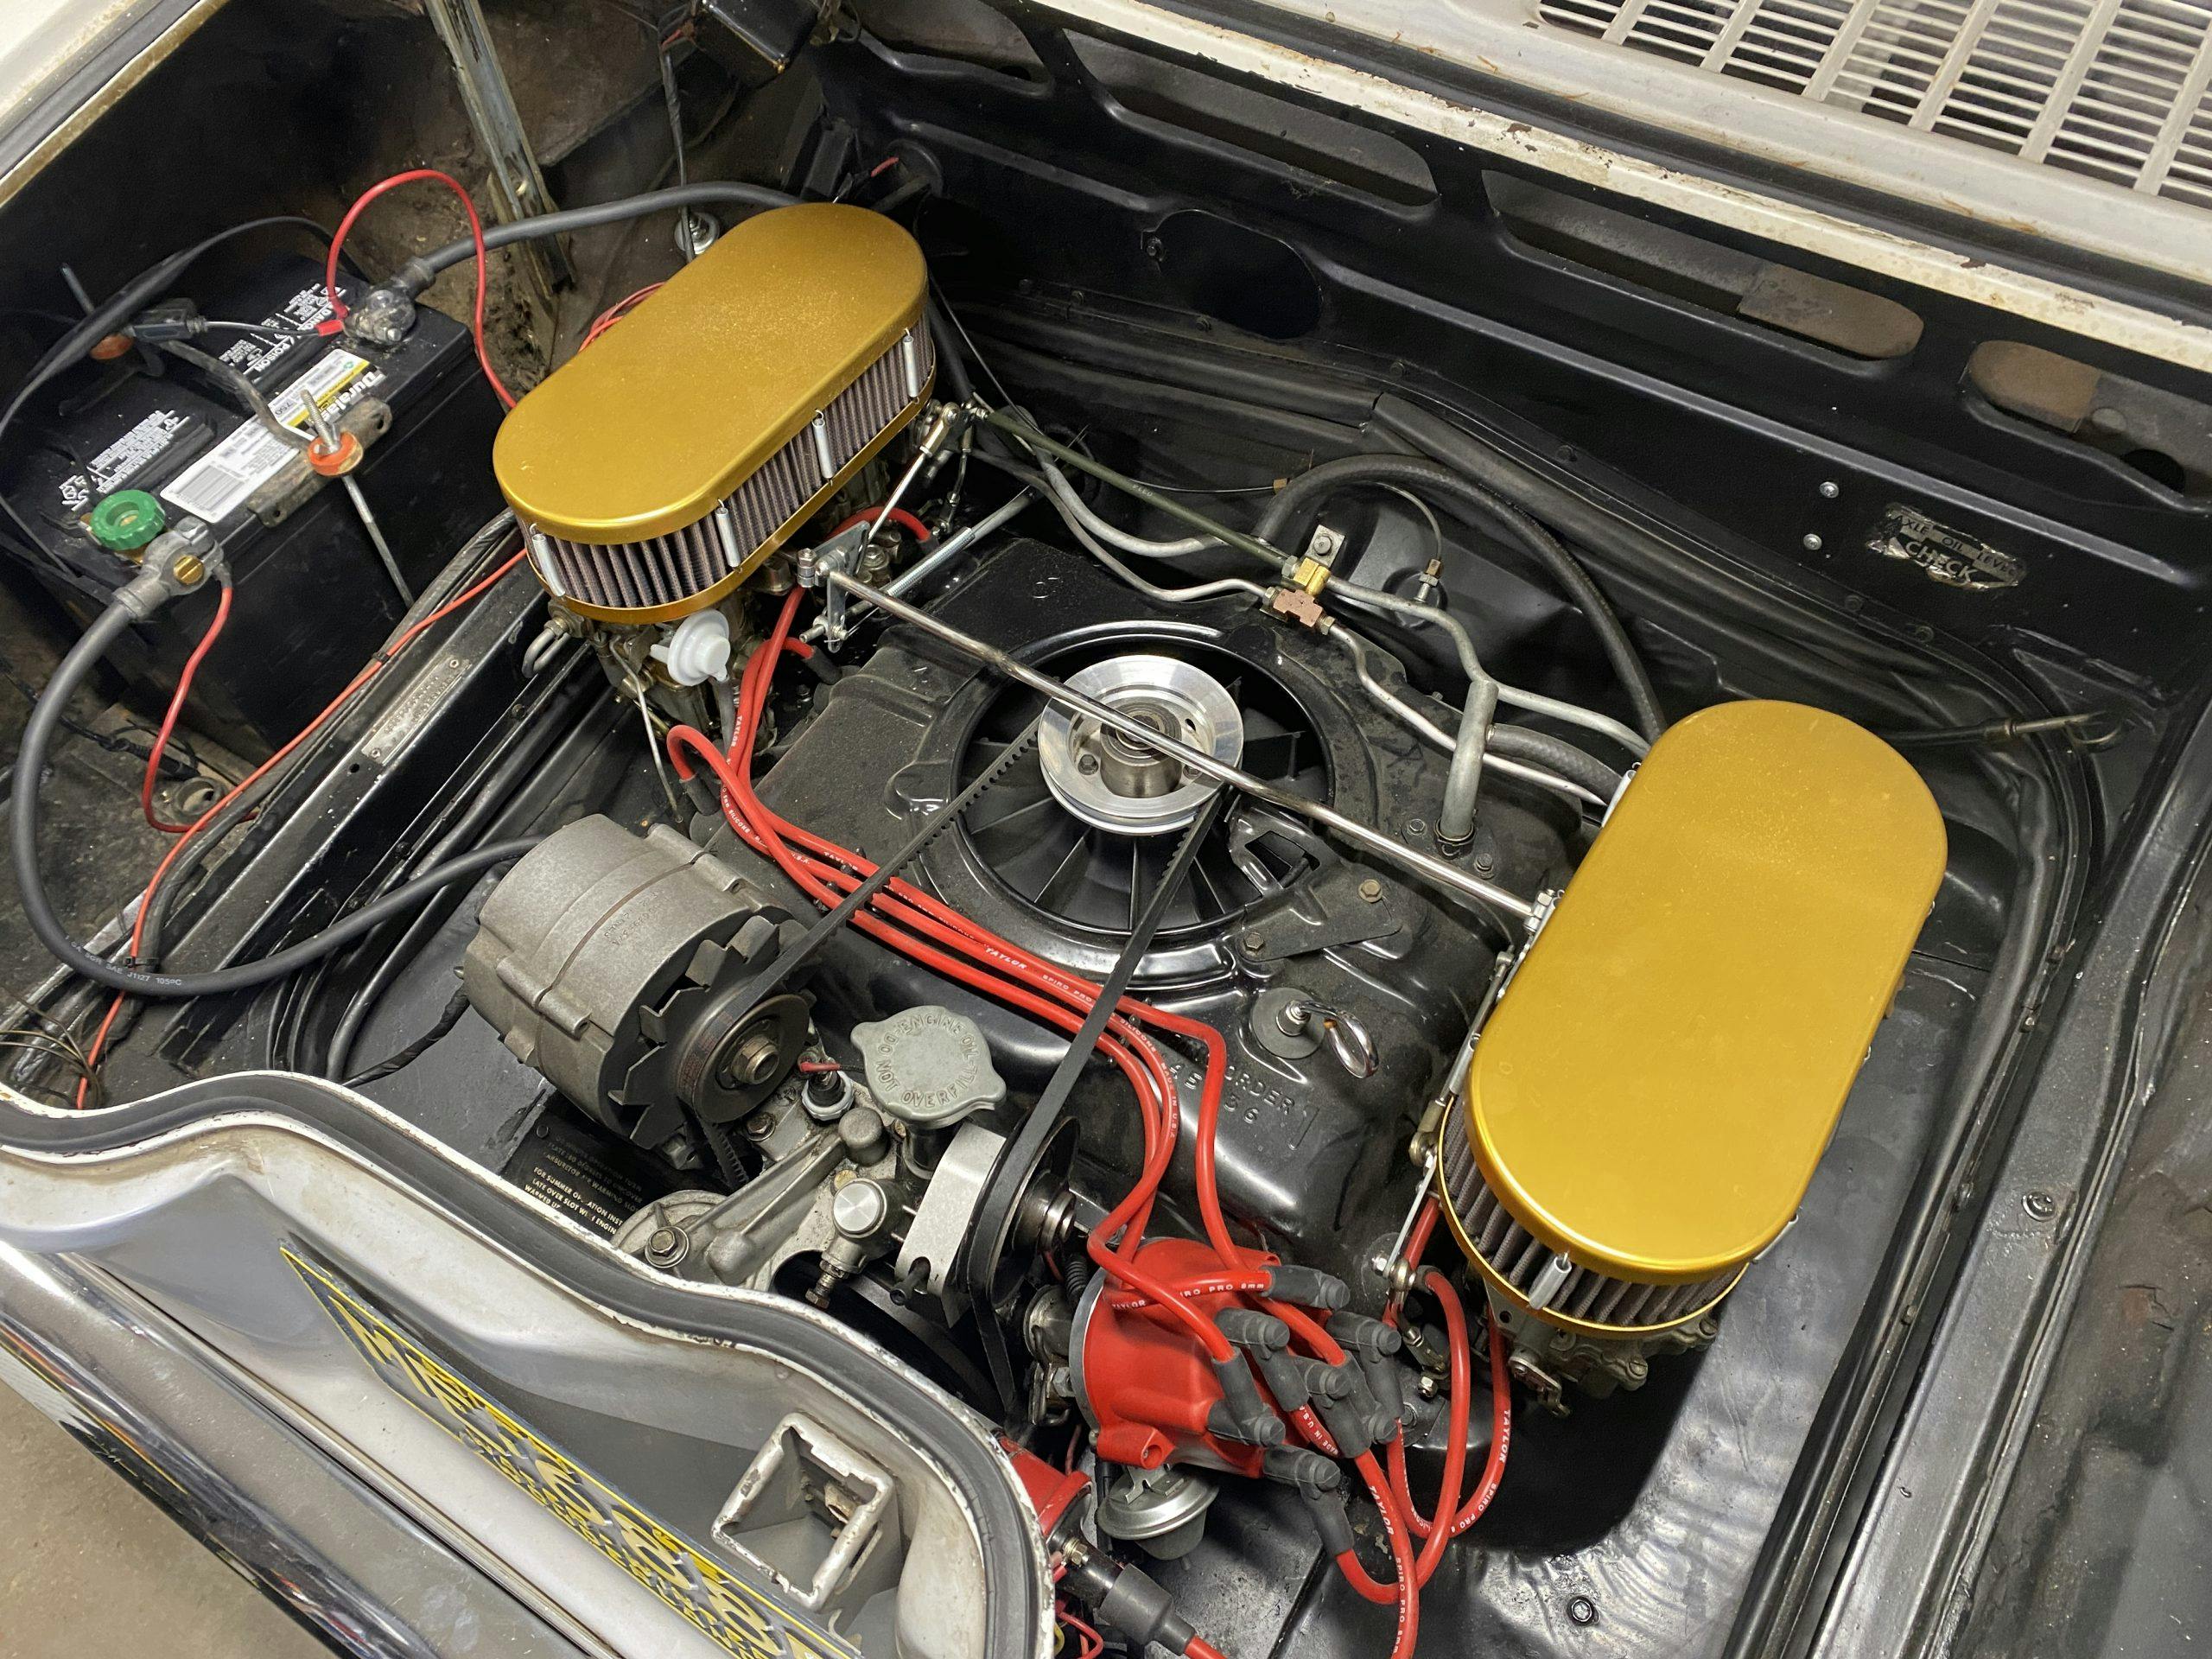 Corvair engine compartment